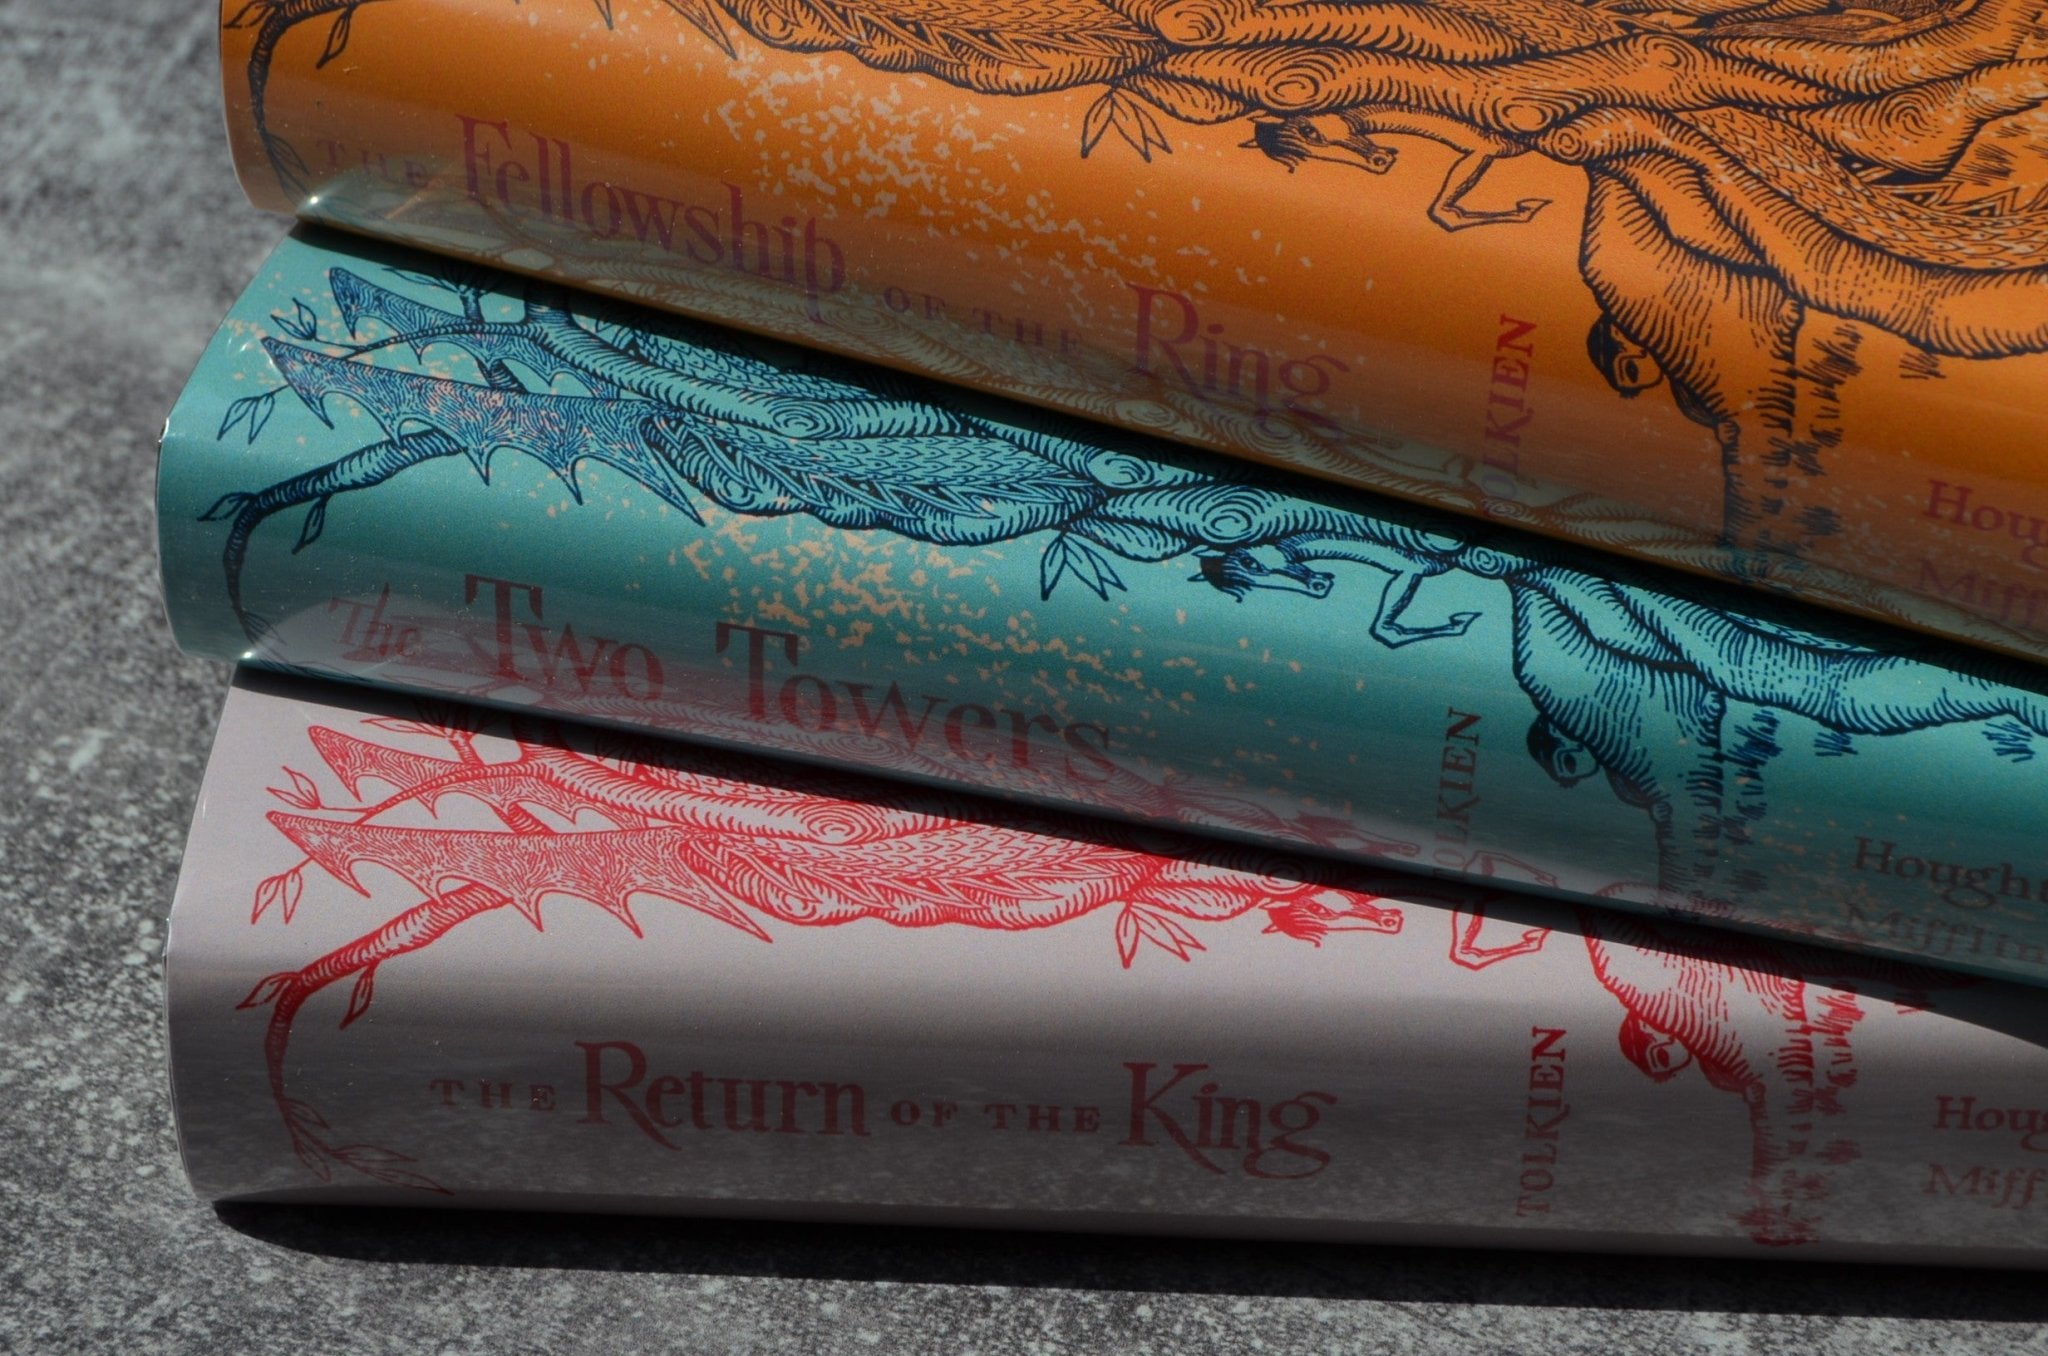 New Editions of The Lord of the Rings Trilogy by J R R Tolkien in Facsimile First Edition Dust Jackets - Brookfield Books